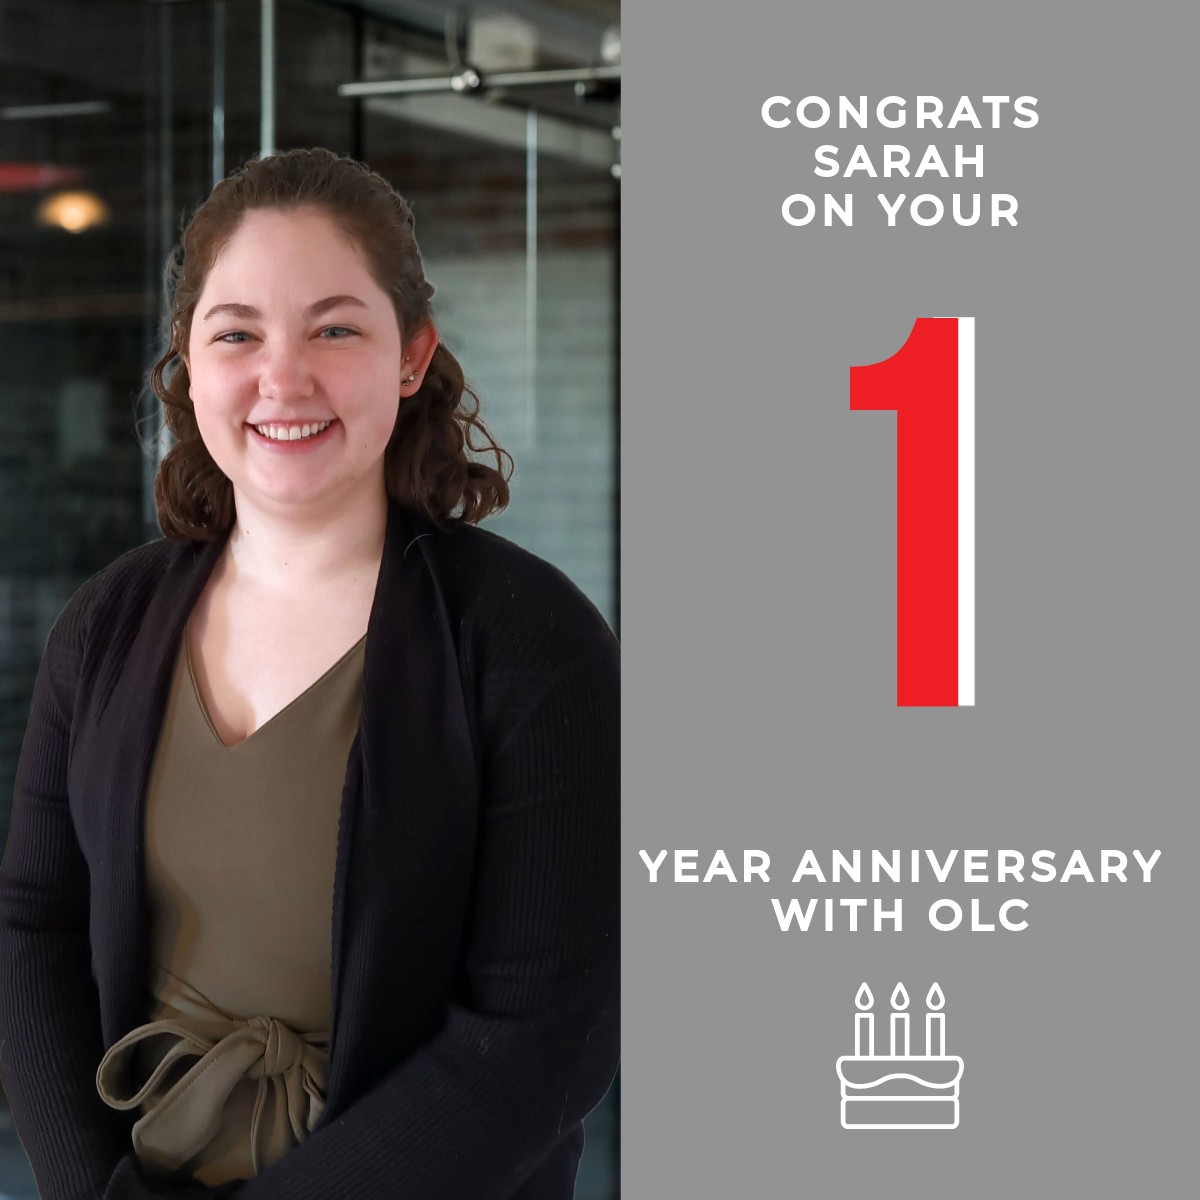 Celebrating 1 year of creativity & dedication at OLC with Sarah Murray, our Junior Marketing Coordinator! 🎉Sarah has been an invaluable part of our marketing team contributing to a variety of tasks & events & brightening our office with her infectious enthusiasm & warm presence!